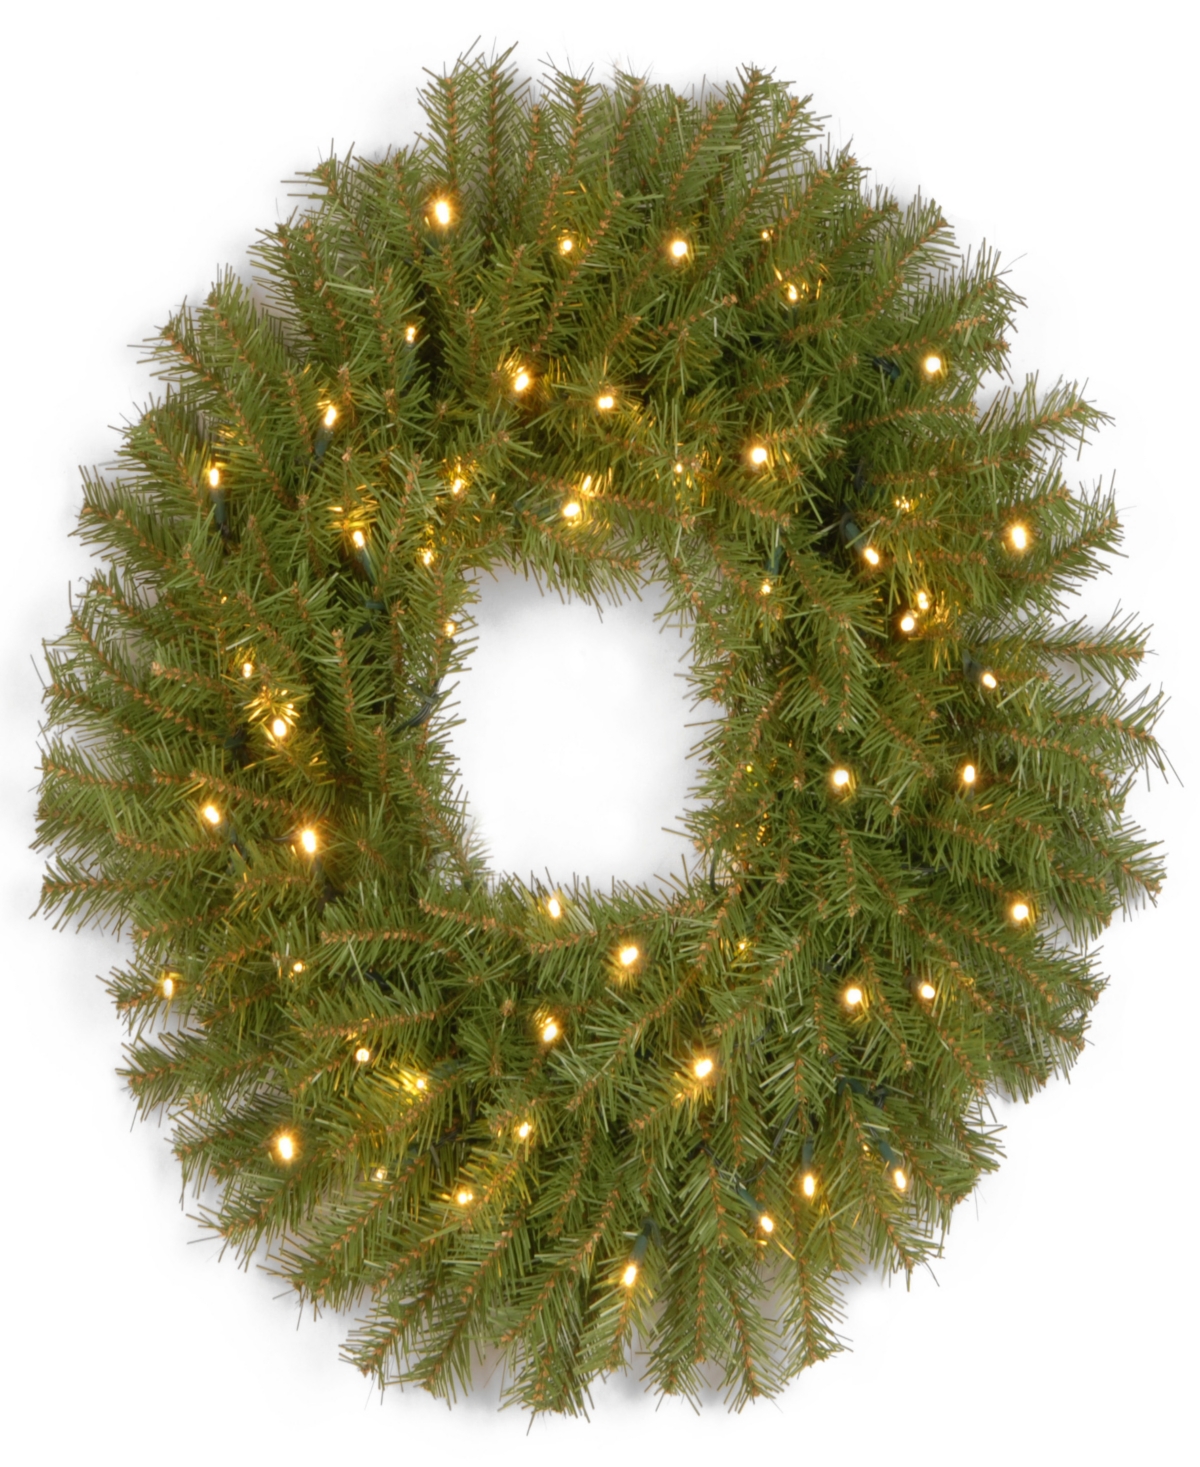 National Tree Company 30" Norwood Fir Wreath With Twinkly Led Lights In Green